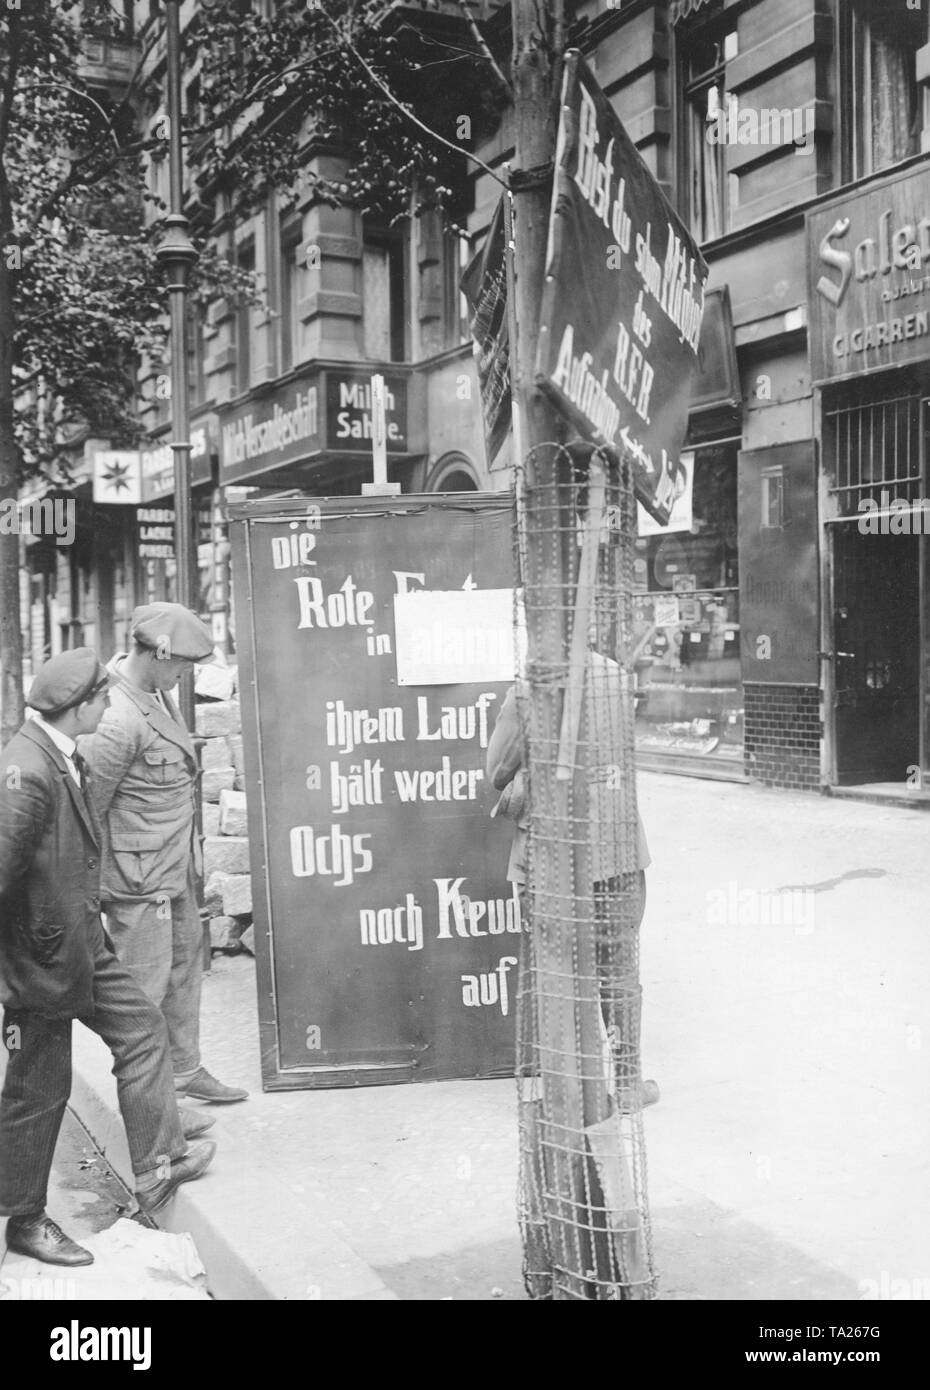 Three men look at a sign of the KPD with the slogan: 'Die Rote Front in ihrem Lauf hält weder Ochs noch Keudel auf'. Stock Photo